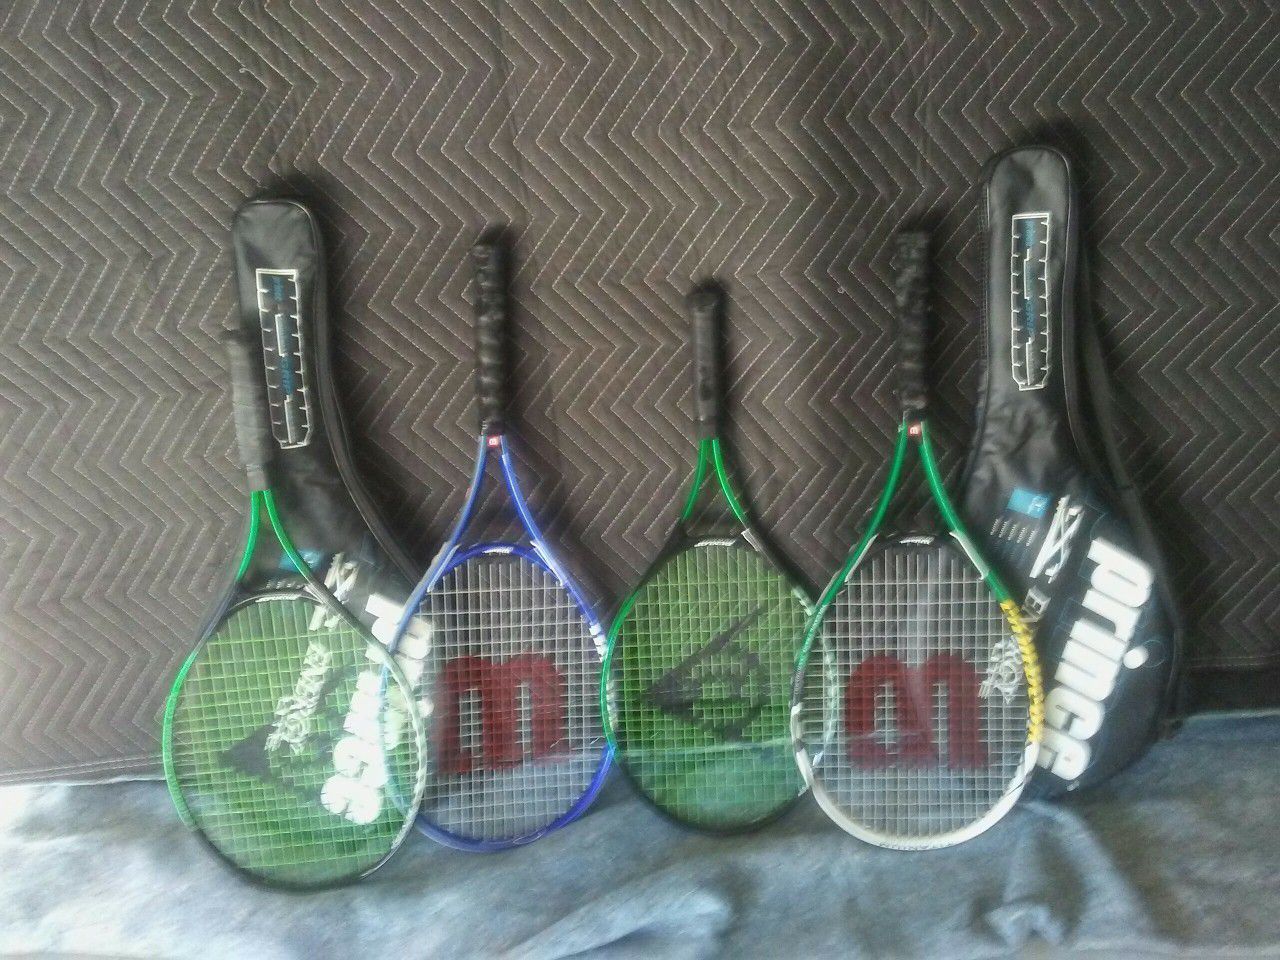 Tennis rackets and covers